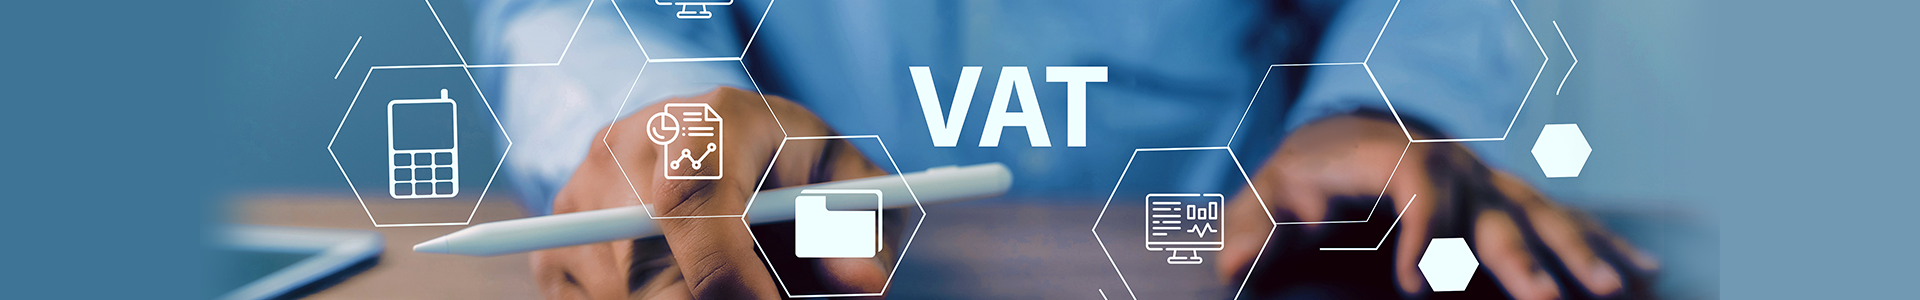 Automate VAT compliance process and ensure audit readiness